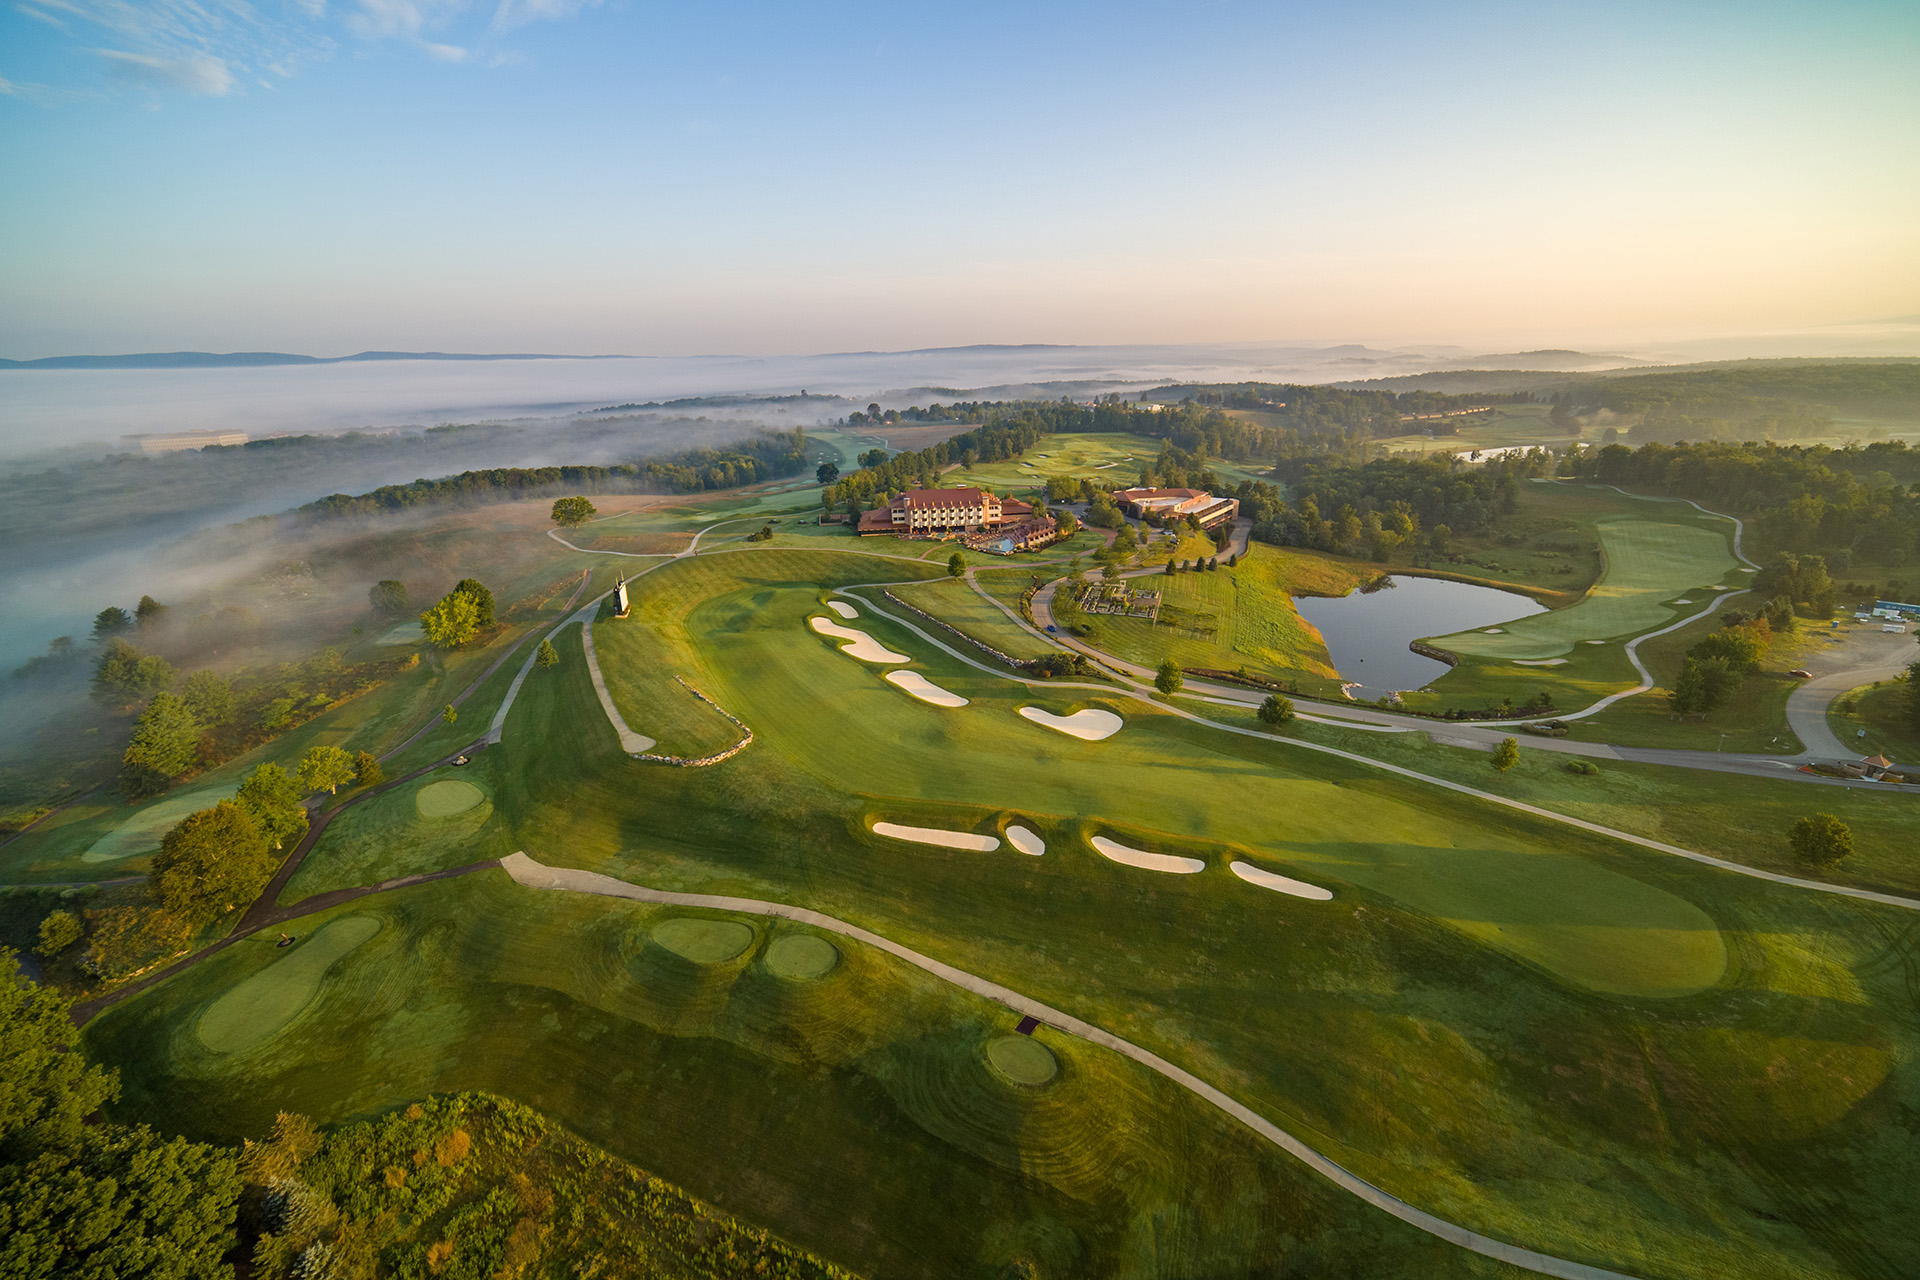 Aerial view of the Falling Rock boutique hotel and Mystic Rock golf course